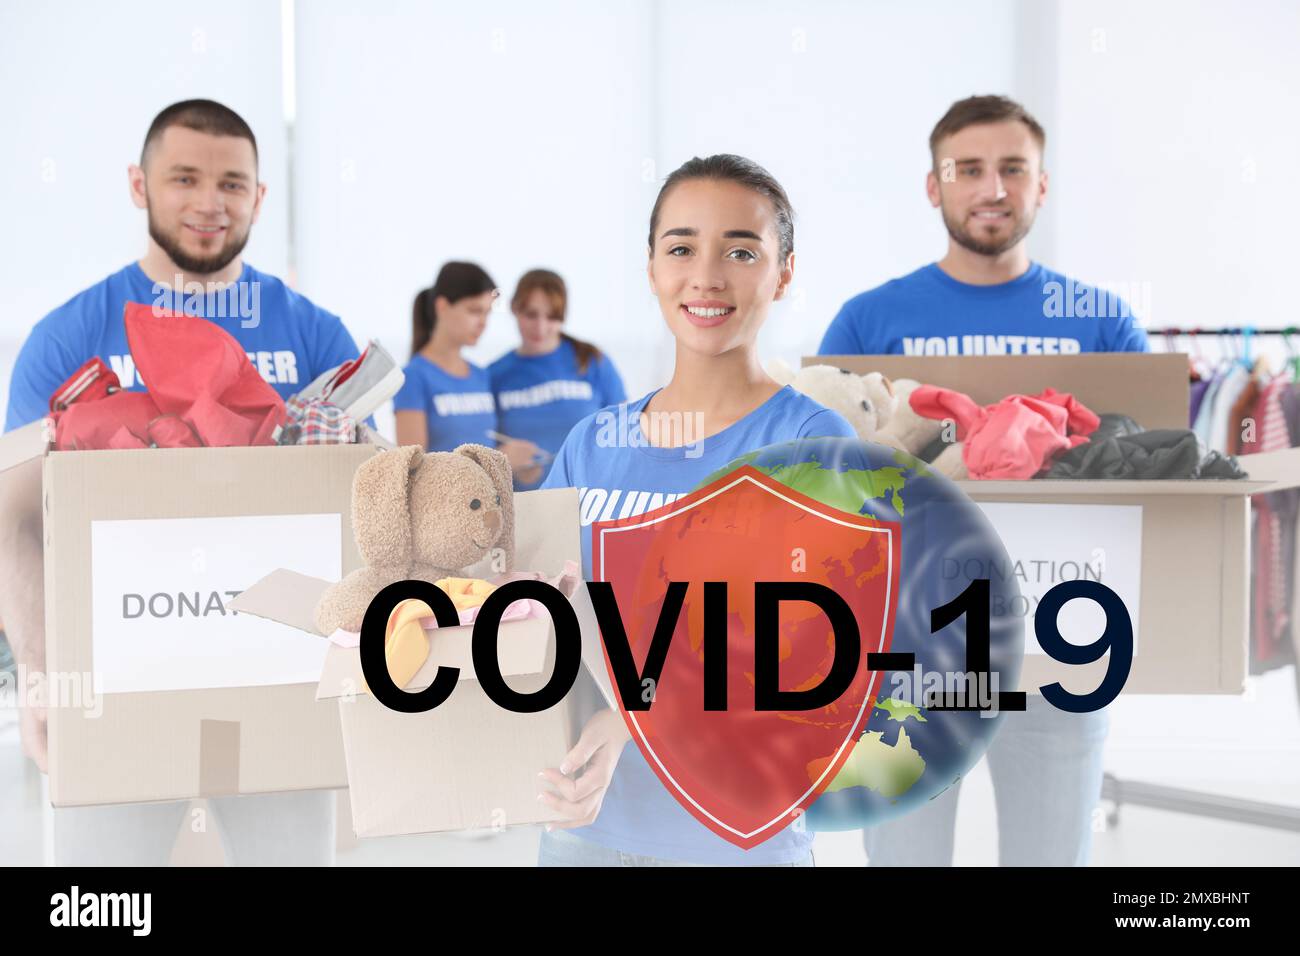 Volunteers uniting to help during COVID-19 outbreak. Group of people with donations indoors, shield and world globe illustrations Stock Photo